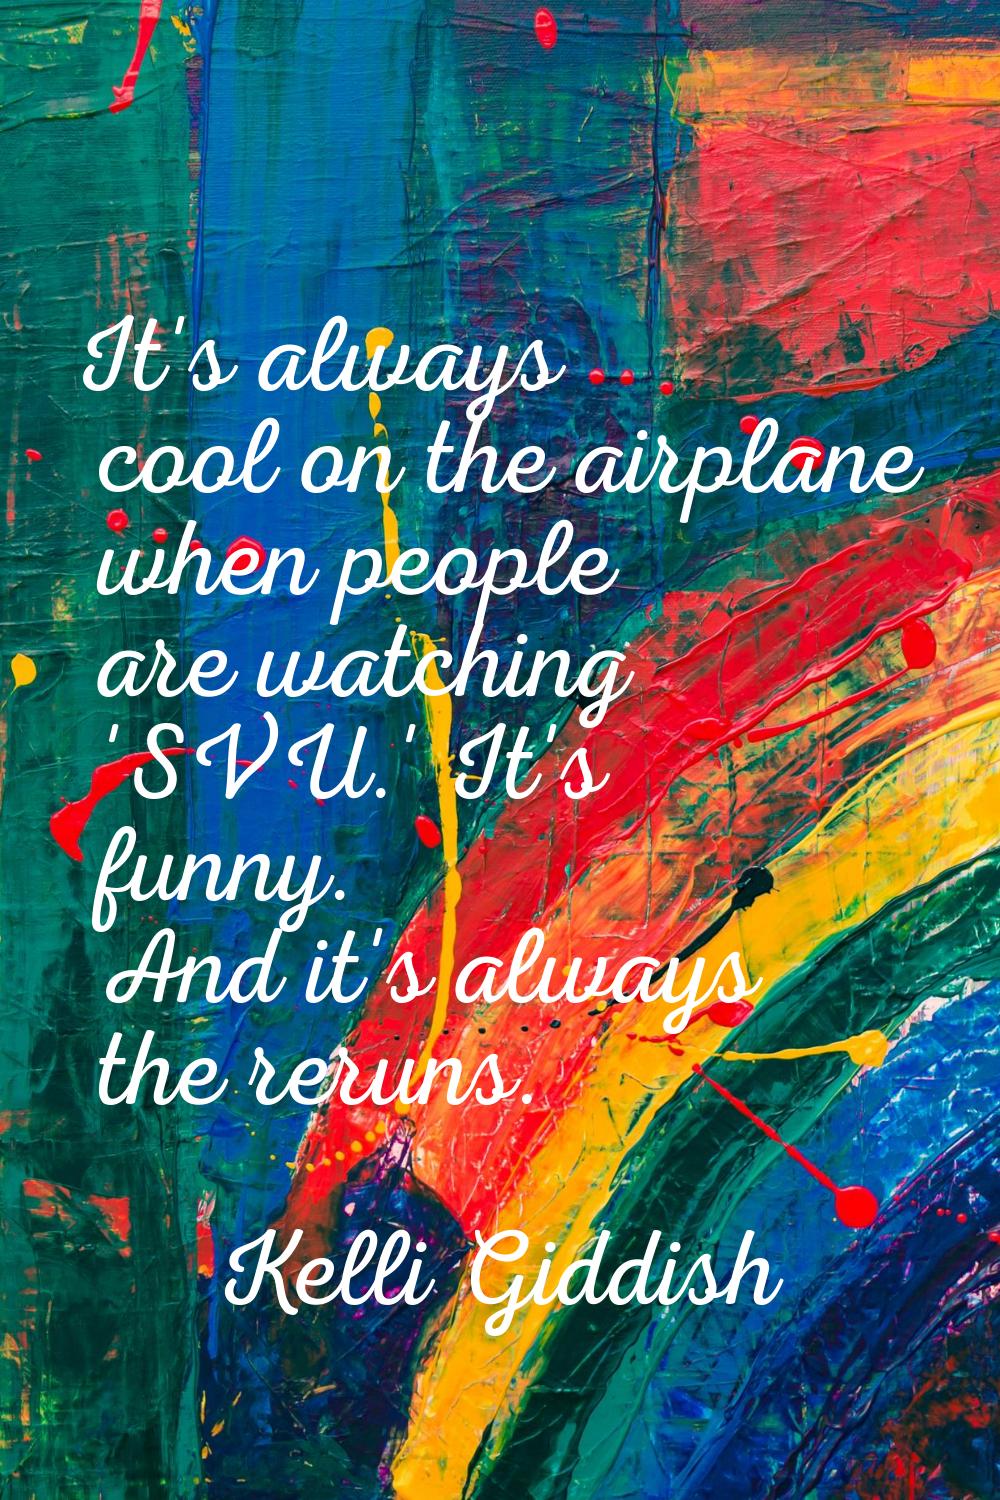 It's always cool on the airplane when people are watching 'SVU.' It's funny. And it's always the re